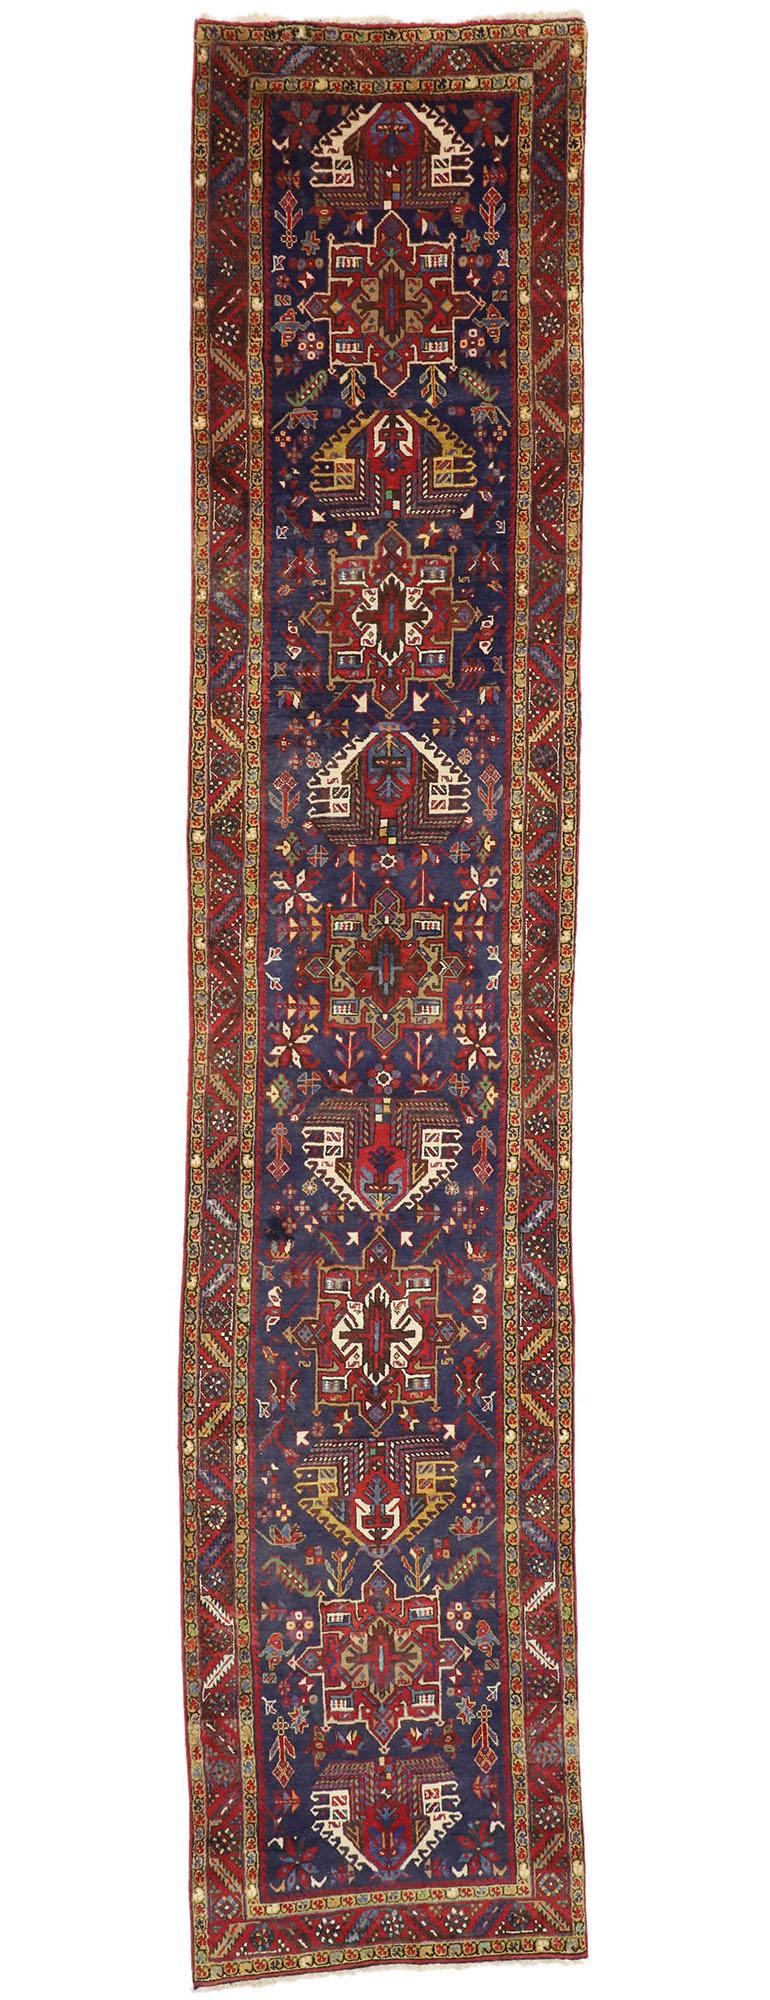 60252 Vintage Persian Karaja Heriz Runner, Tribal Style Hallway Runner 03'01 x 14'07. Bright and dynamic with visual appeal, this hand knotted wool vintage Persian Karaja Heriz runner features a column of distinctive medallions and amulets similar